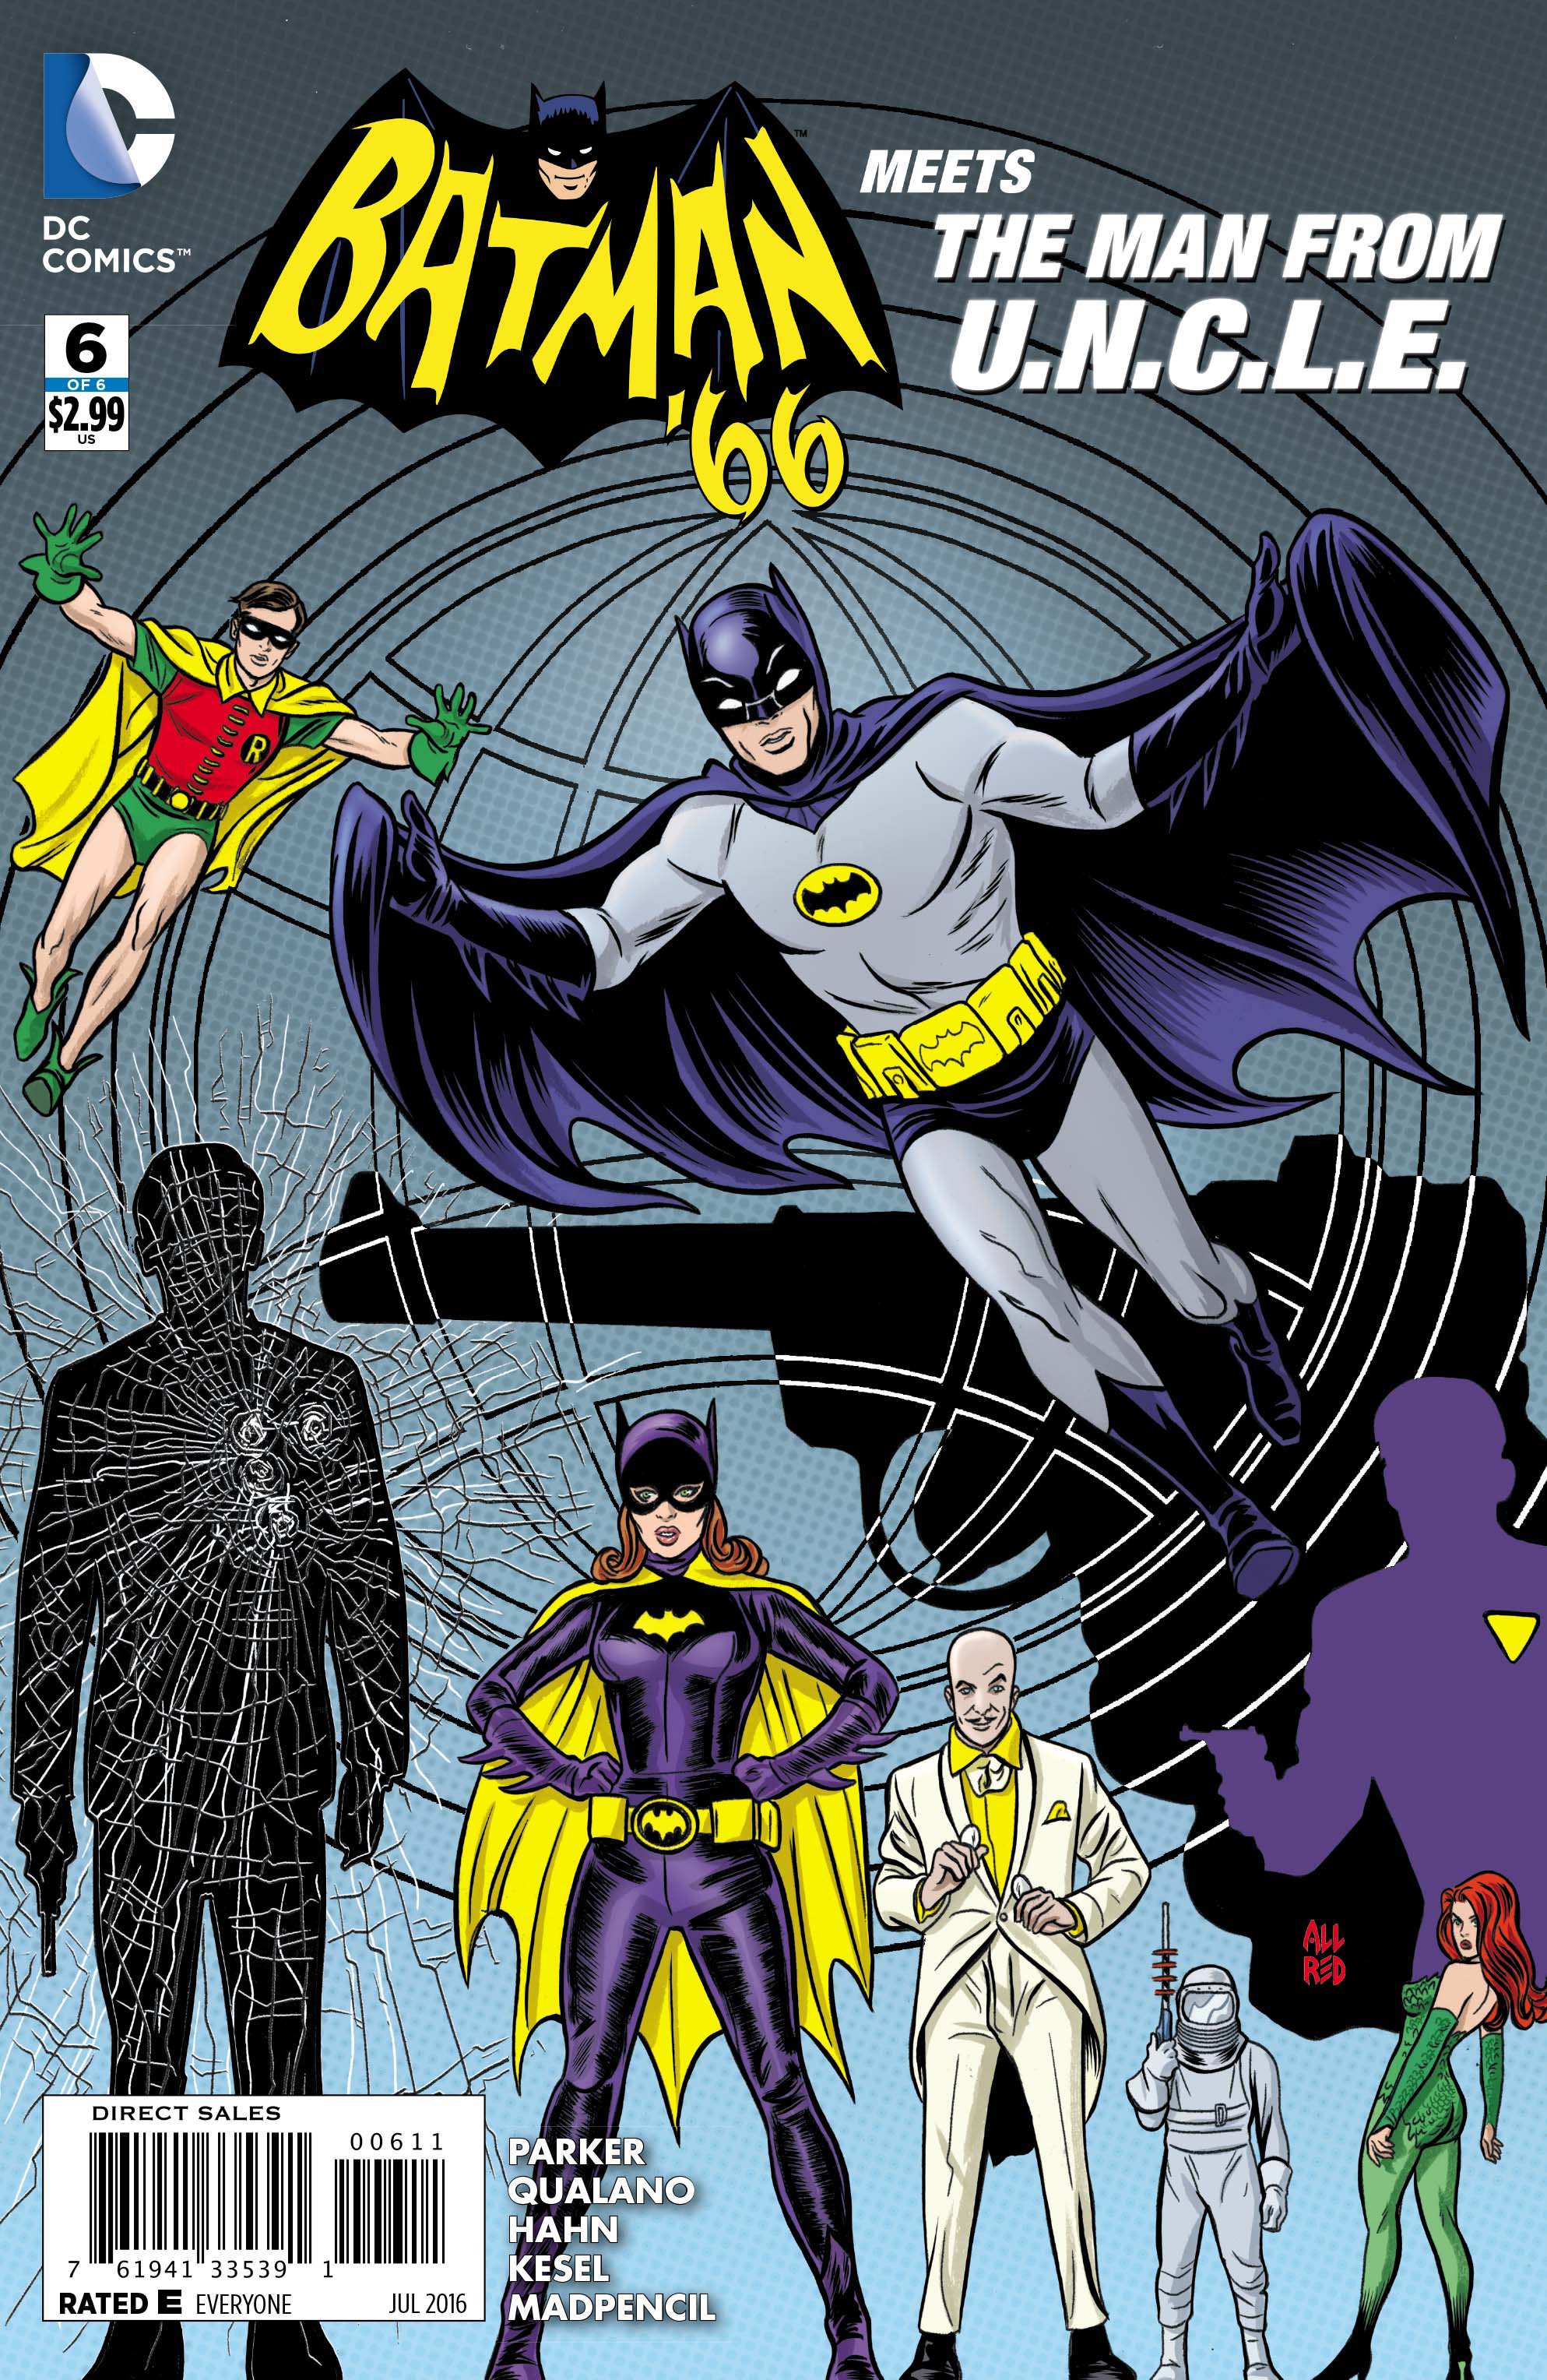 BATMAN 66 MEETS THE MAN FROM UNCLE #6 (OF 6)